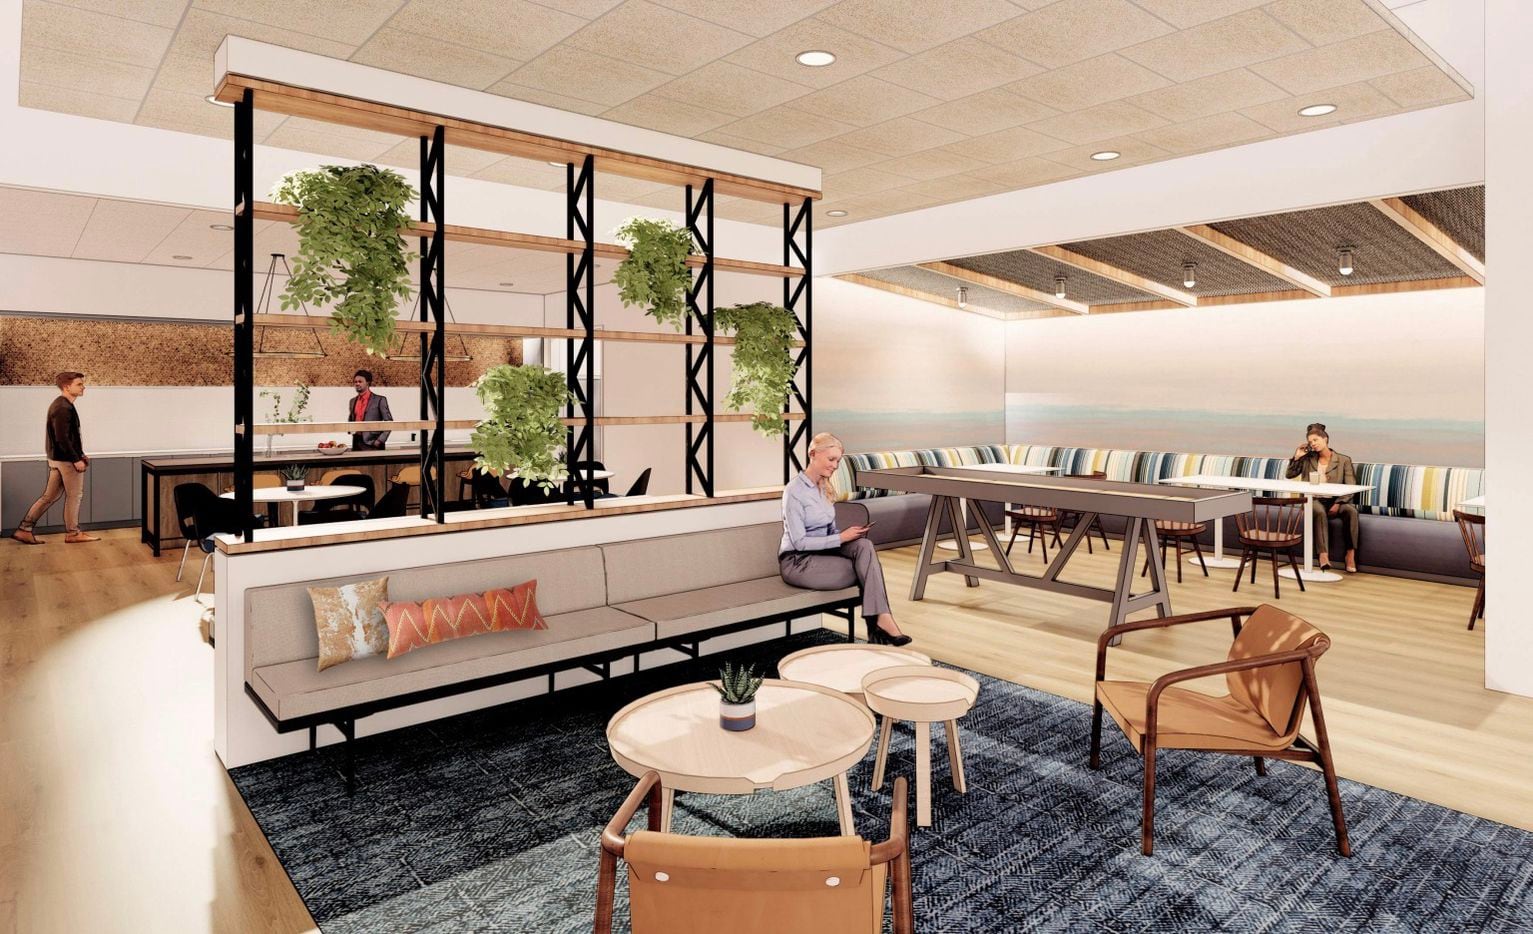 A rendering of one of the cafes being added to Bank of America's Plano campus buildings,...